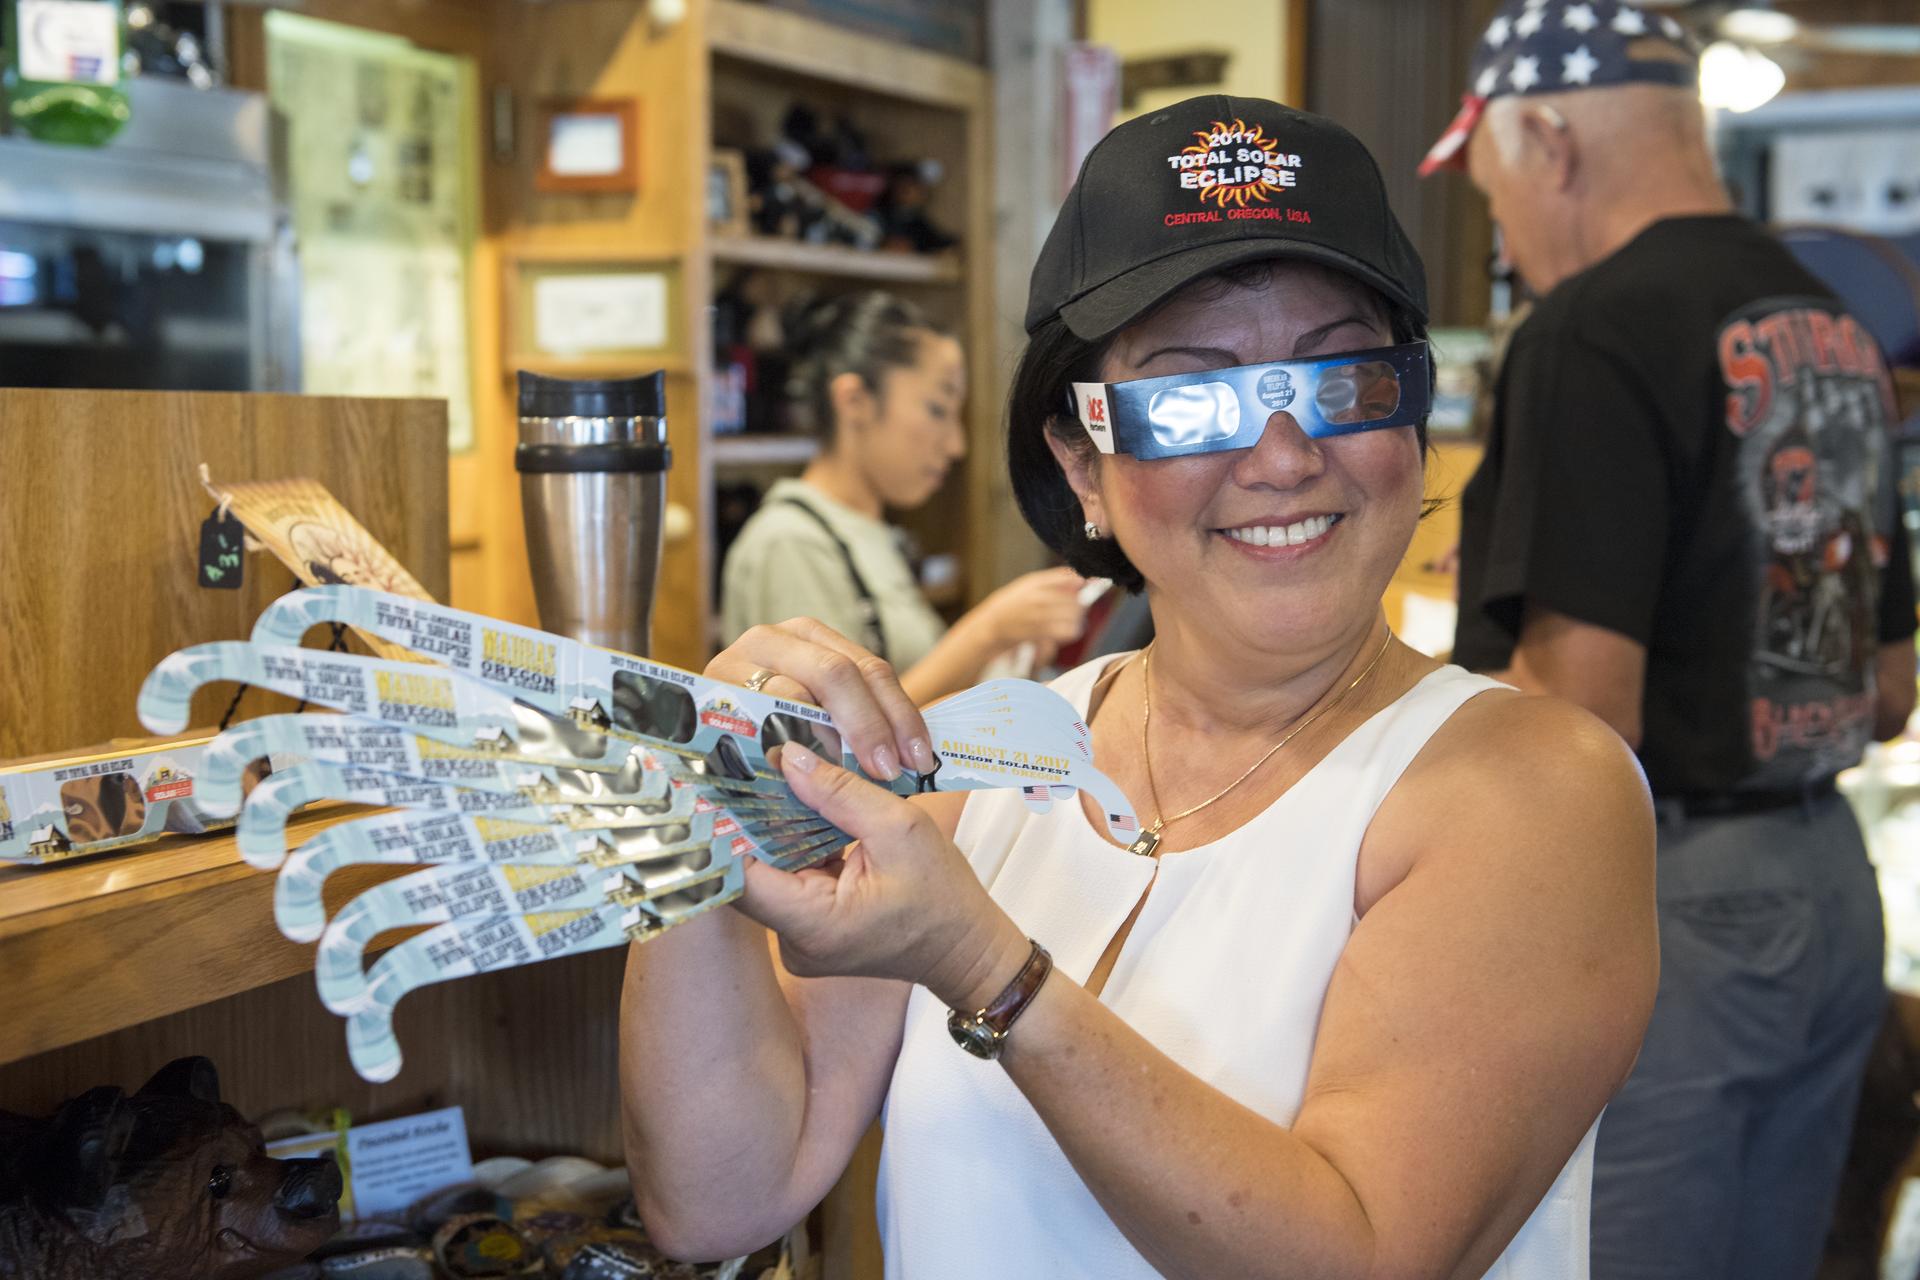 A smiling woman in a store wearing a hat that says “2017 Total Solar Eclipse” holds up a handful of eclipse-viewing glasses fanned out so they can all be seen. In the background, a man stands at a counter and pays for his items. 